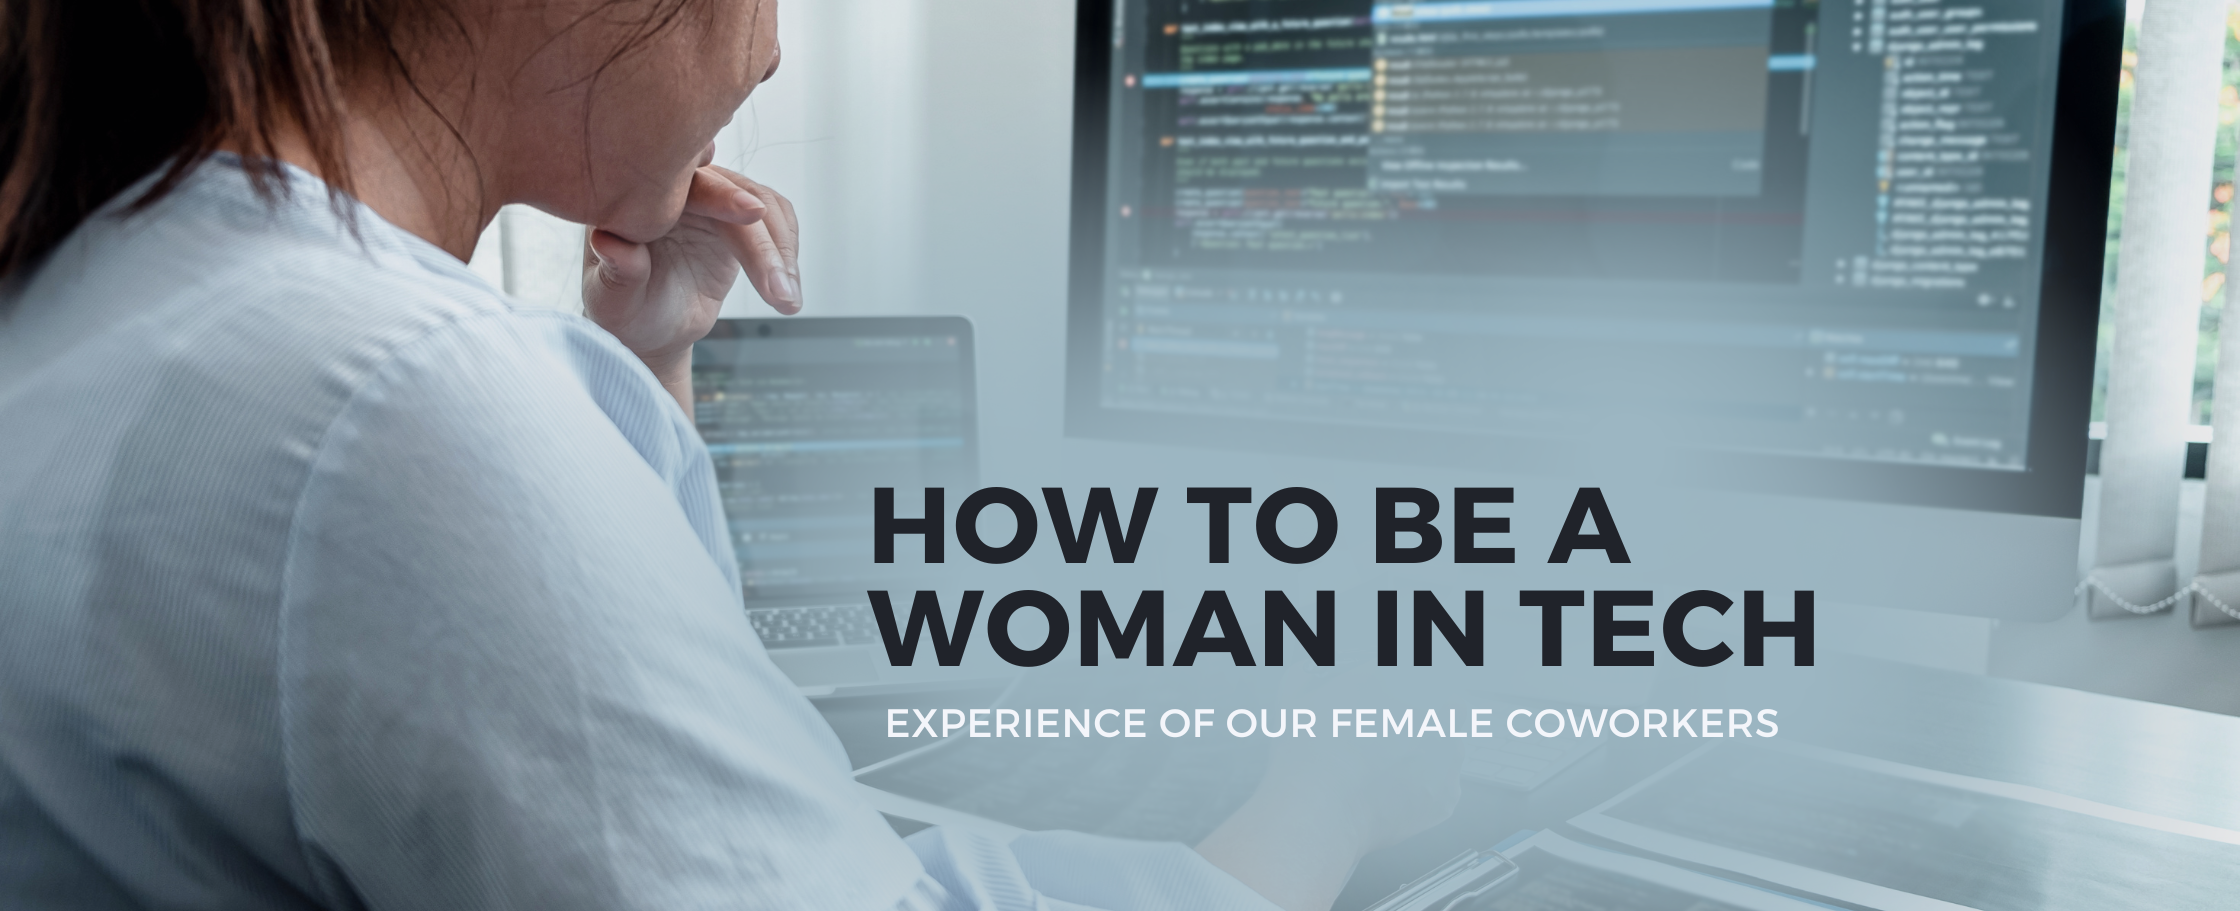 How to be a Woman in the Tech industry. Experience of our female coworkers